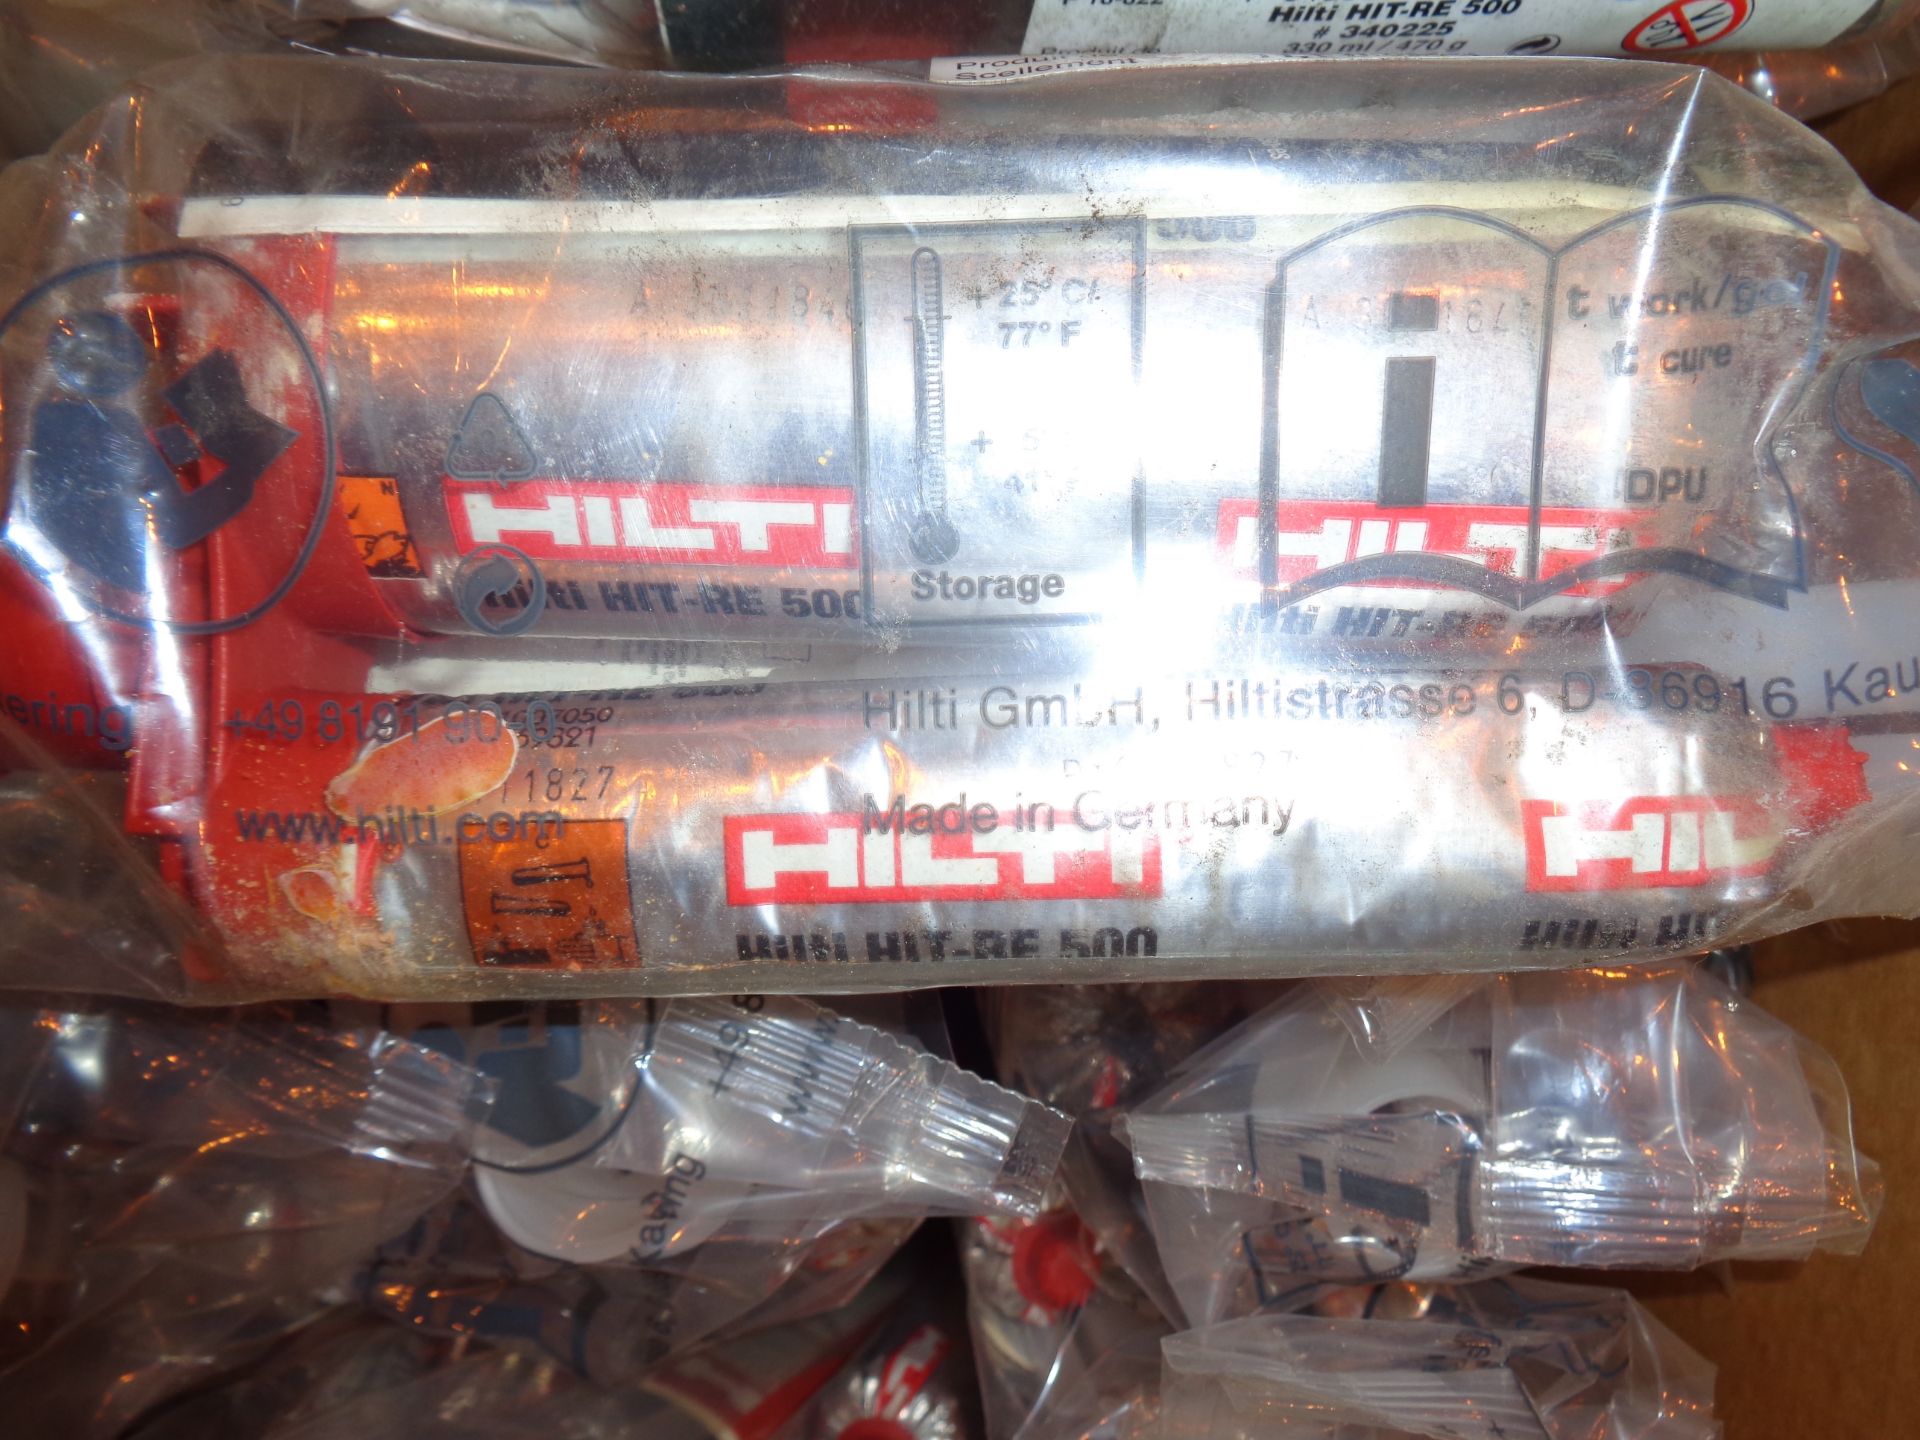 13 Boxes of Hilti Hit-re-500 Epoxy - Image 3 of 16